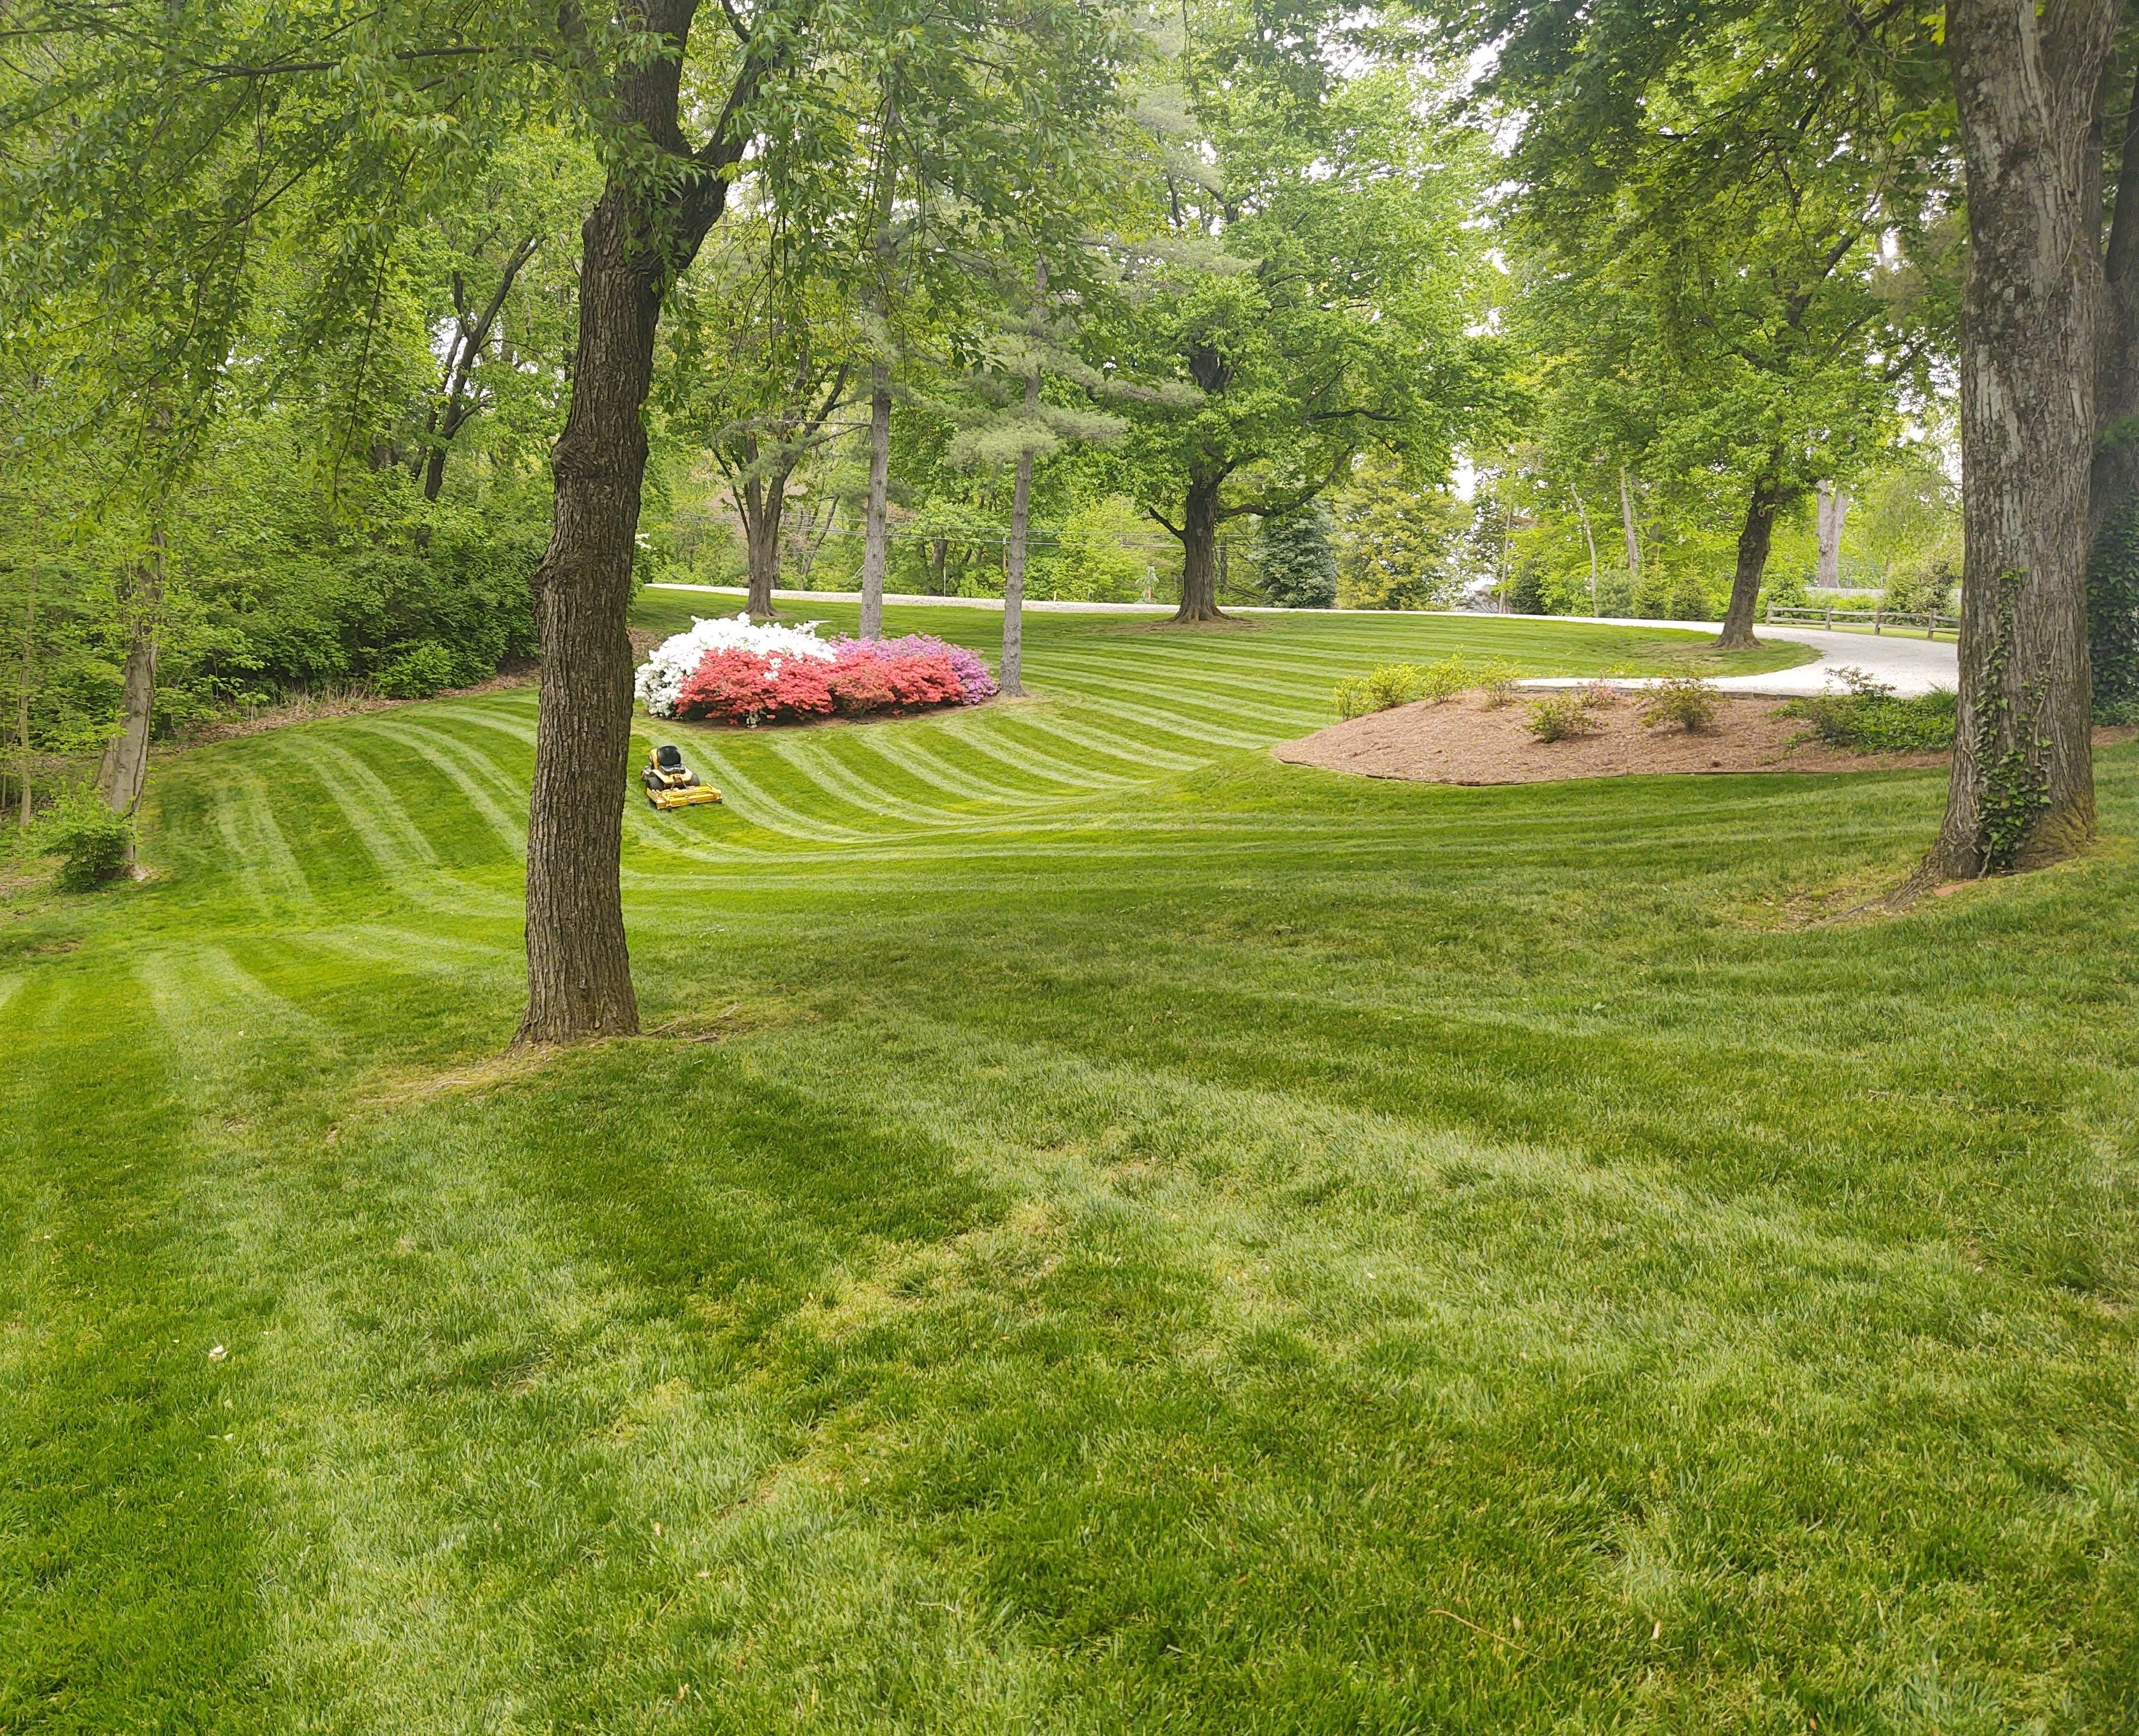 Lawn Care company The Grass Guys Complete Lawn Care LLC. in Evansville, IN